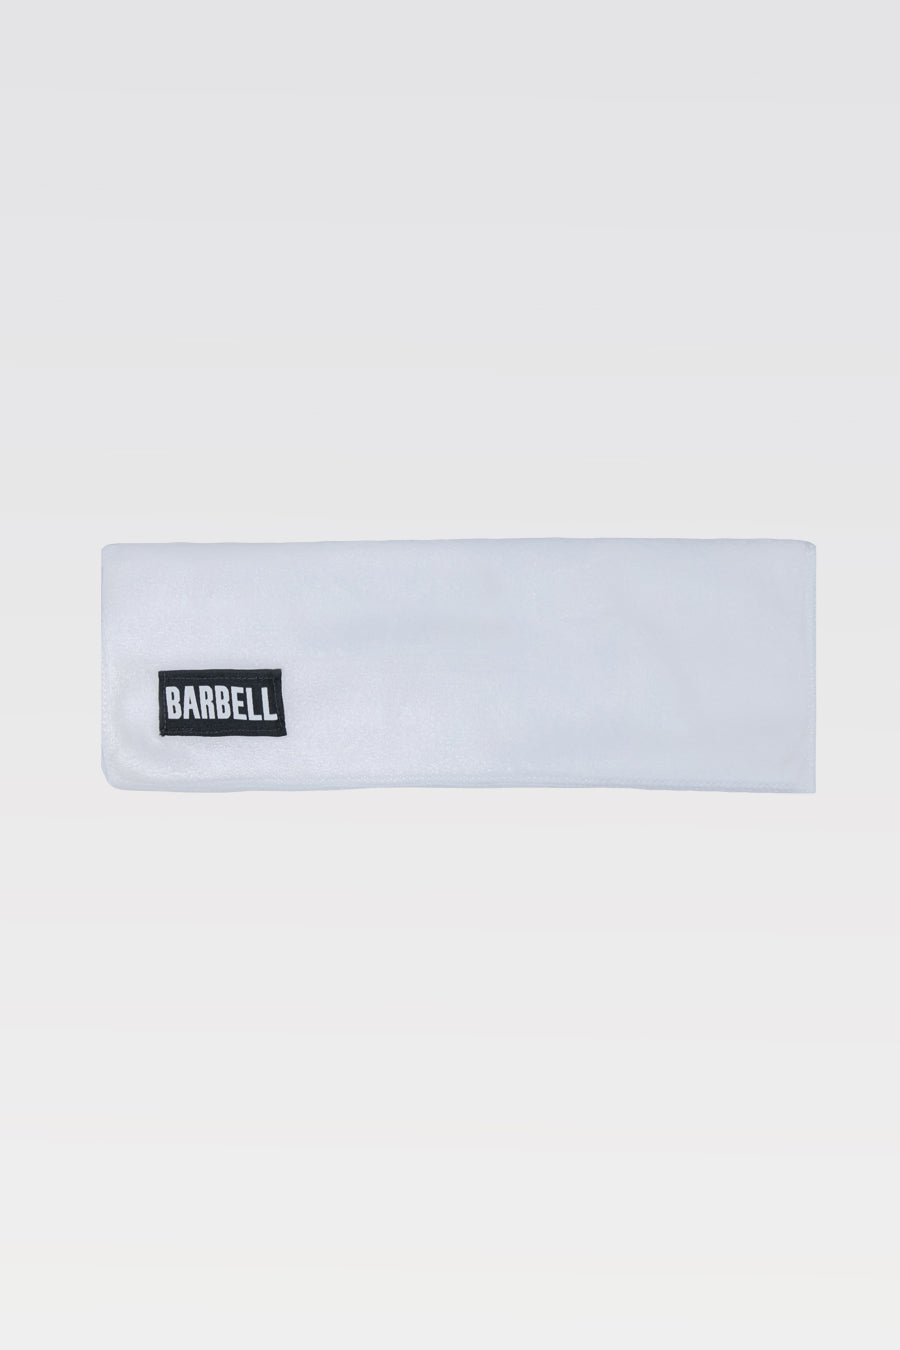 Barbell Gym Towel - White - photo from front #color_white